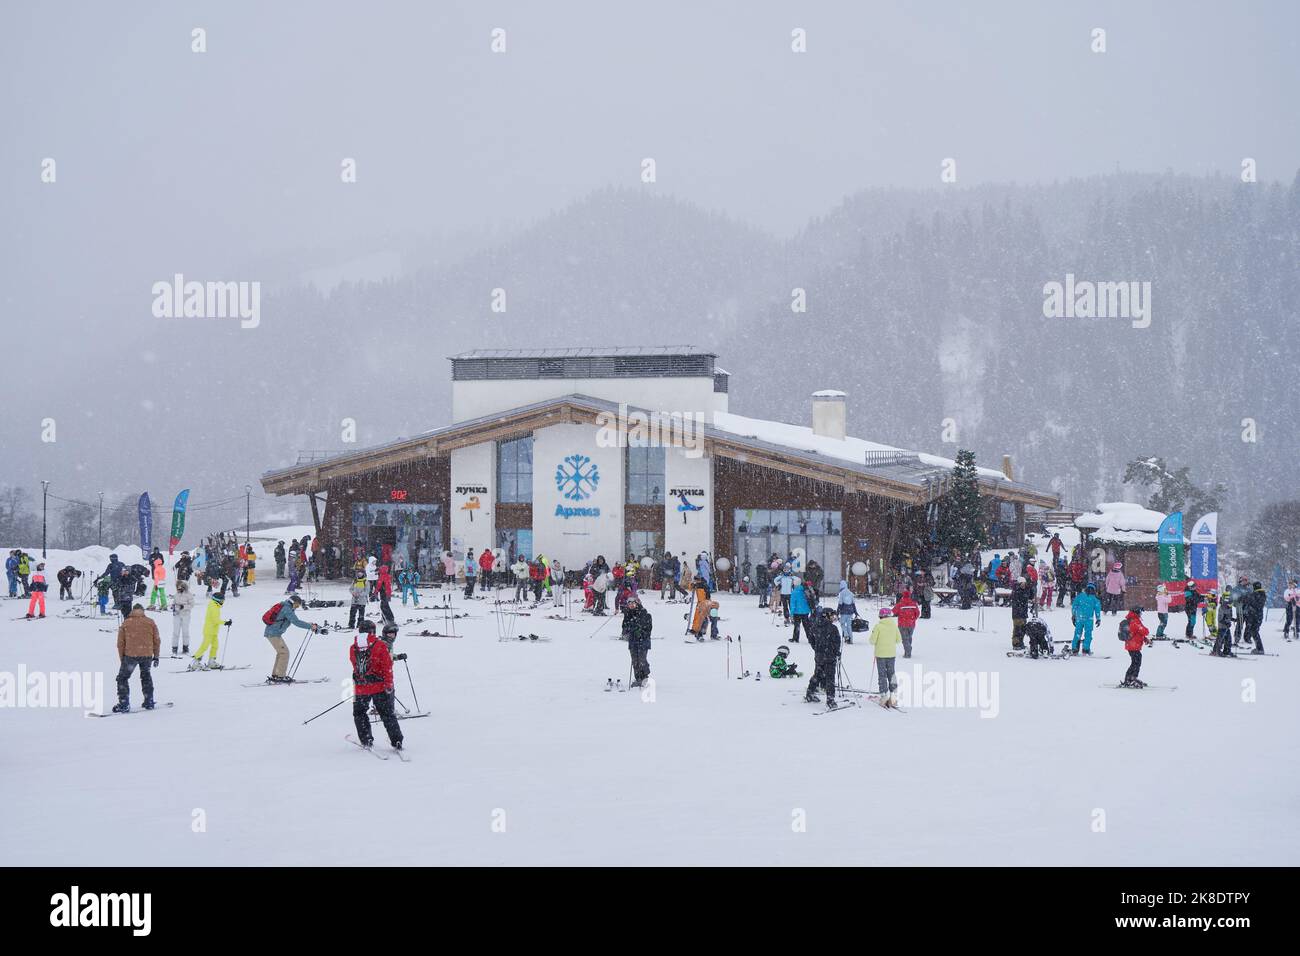 Crowd of people snowboarders and skiers in ski resort Stock Photo